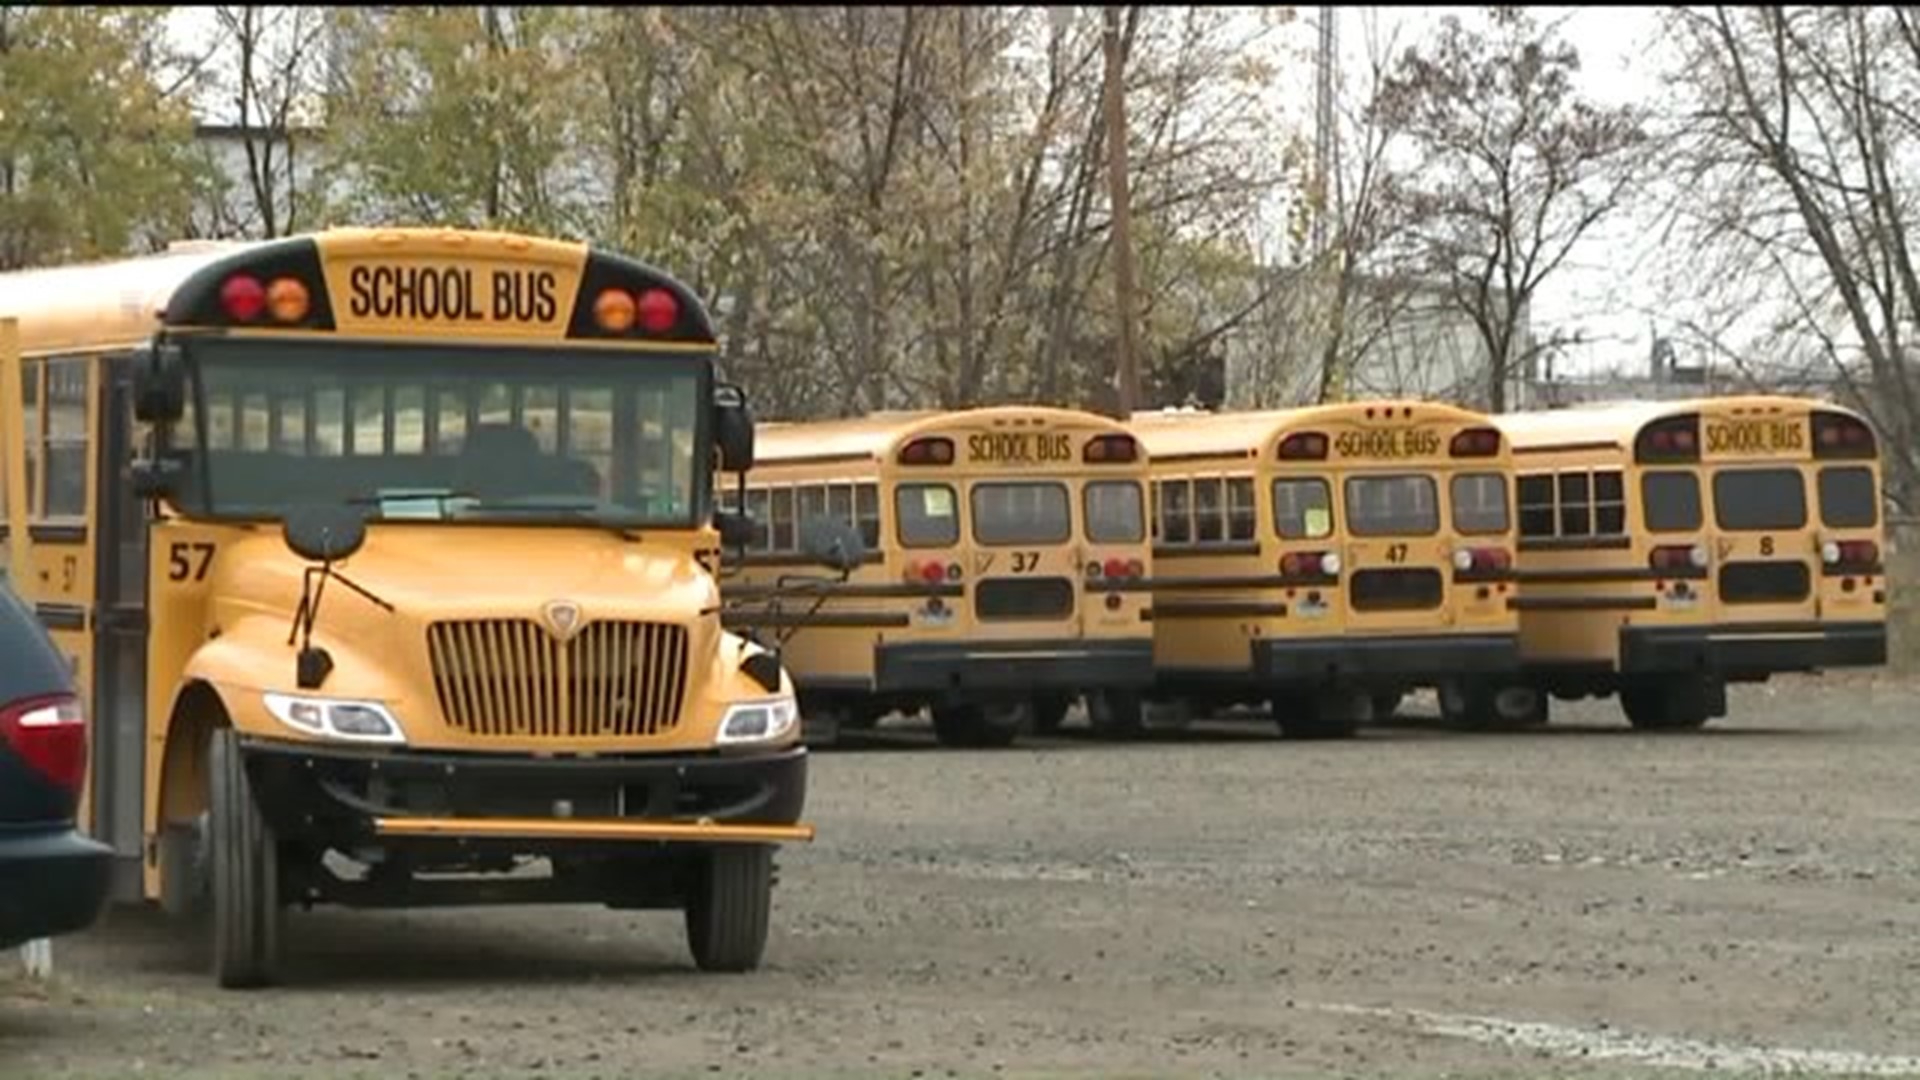 Seatbelts on School Buses: Who Will Pay?